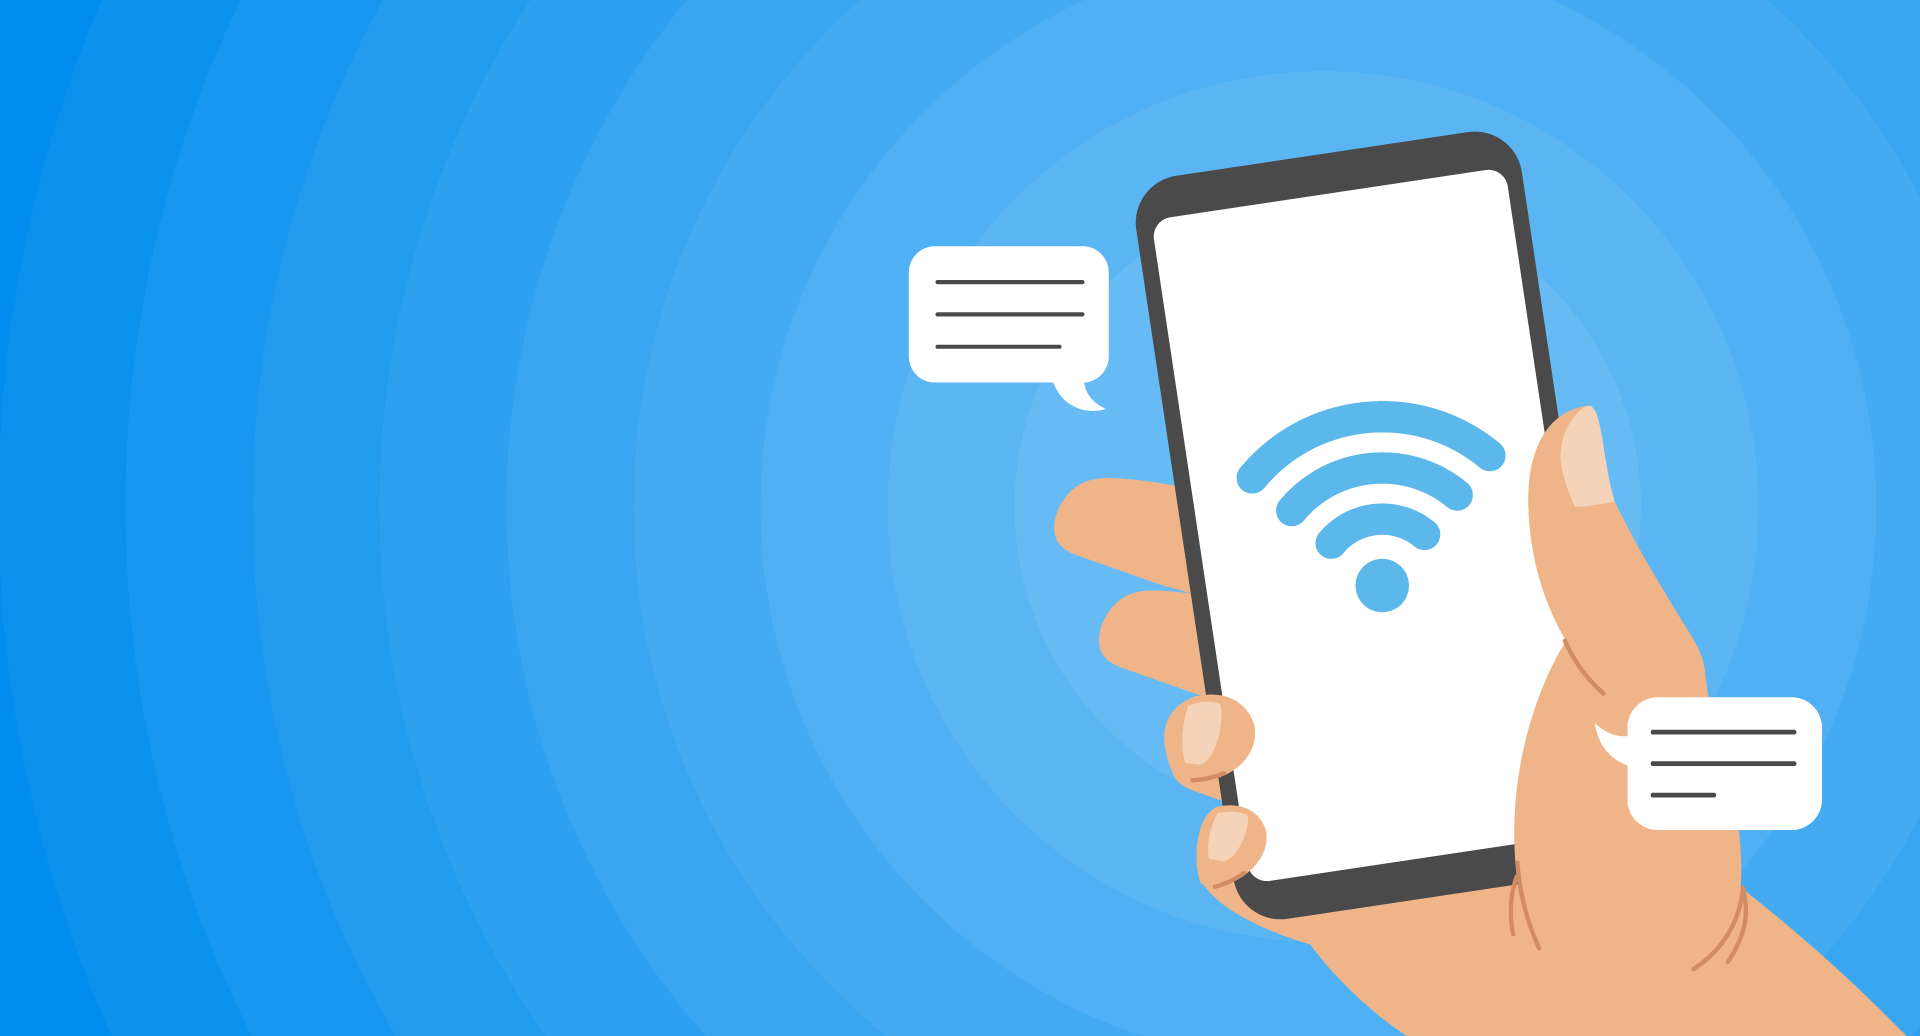 Call using Wi-Fi on your iPhone